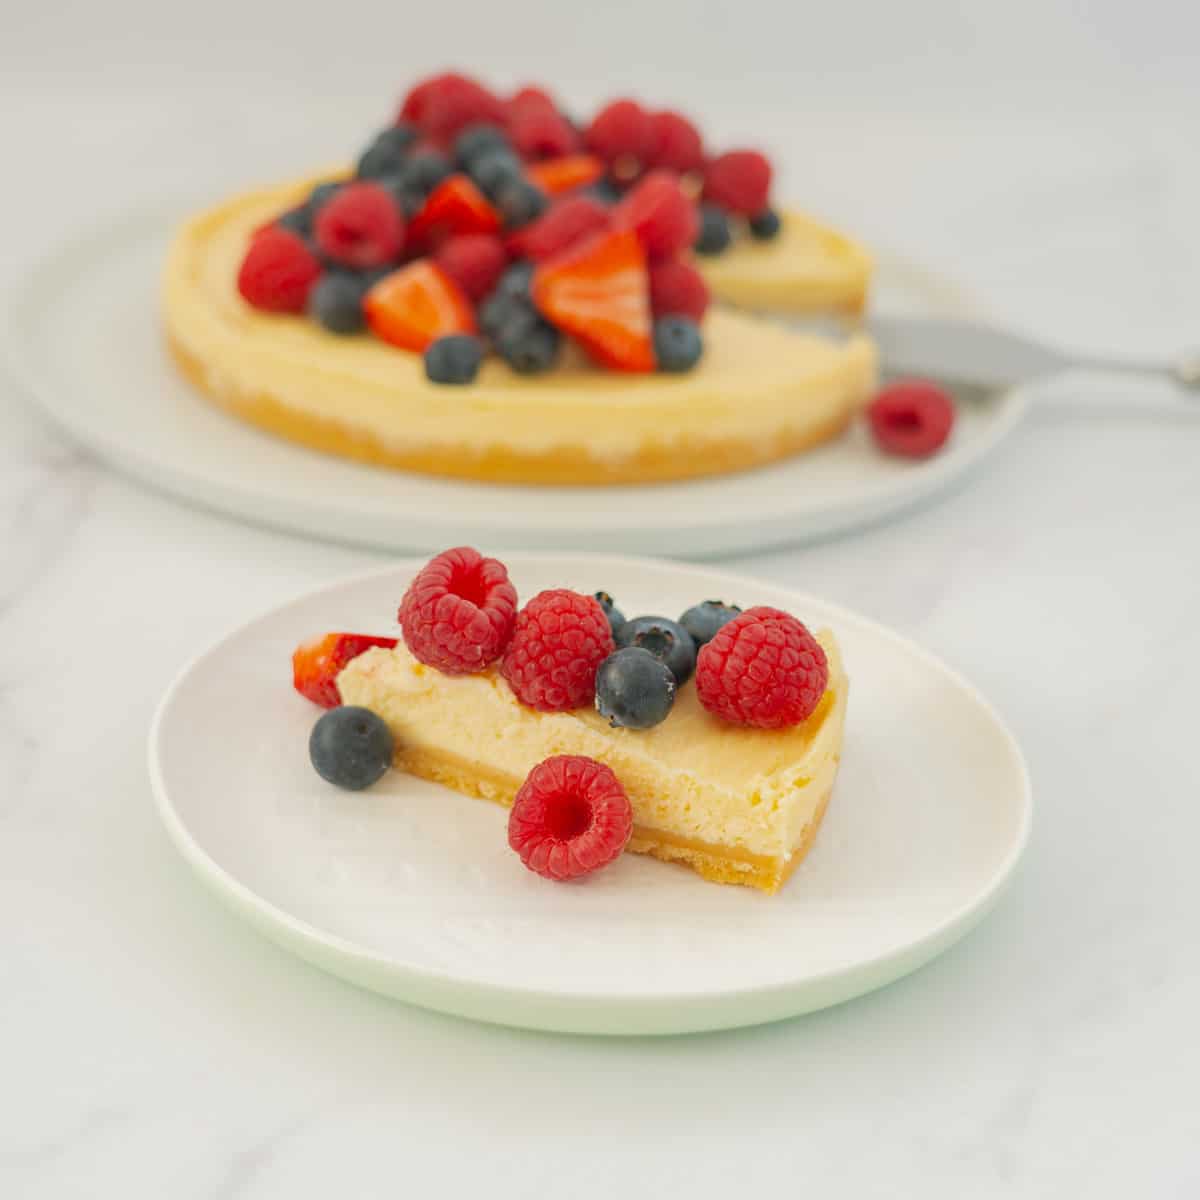 A slice of cheesecake topped with berries sitting on a white plate.